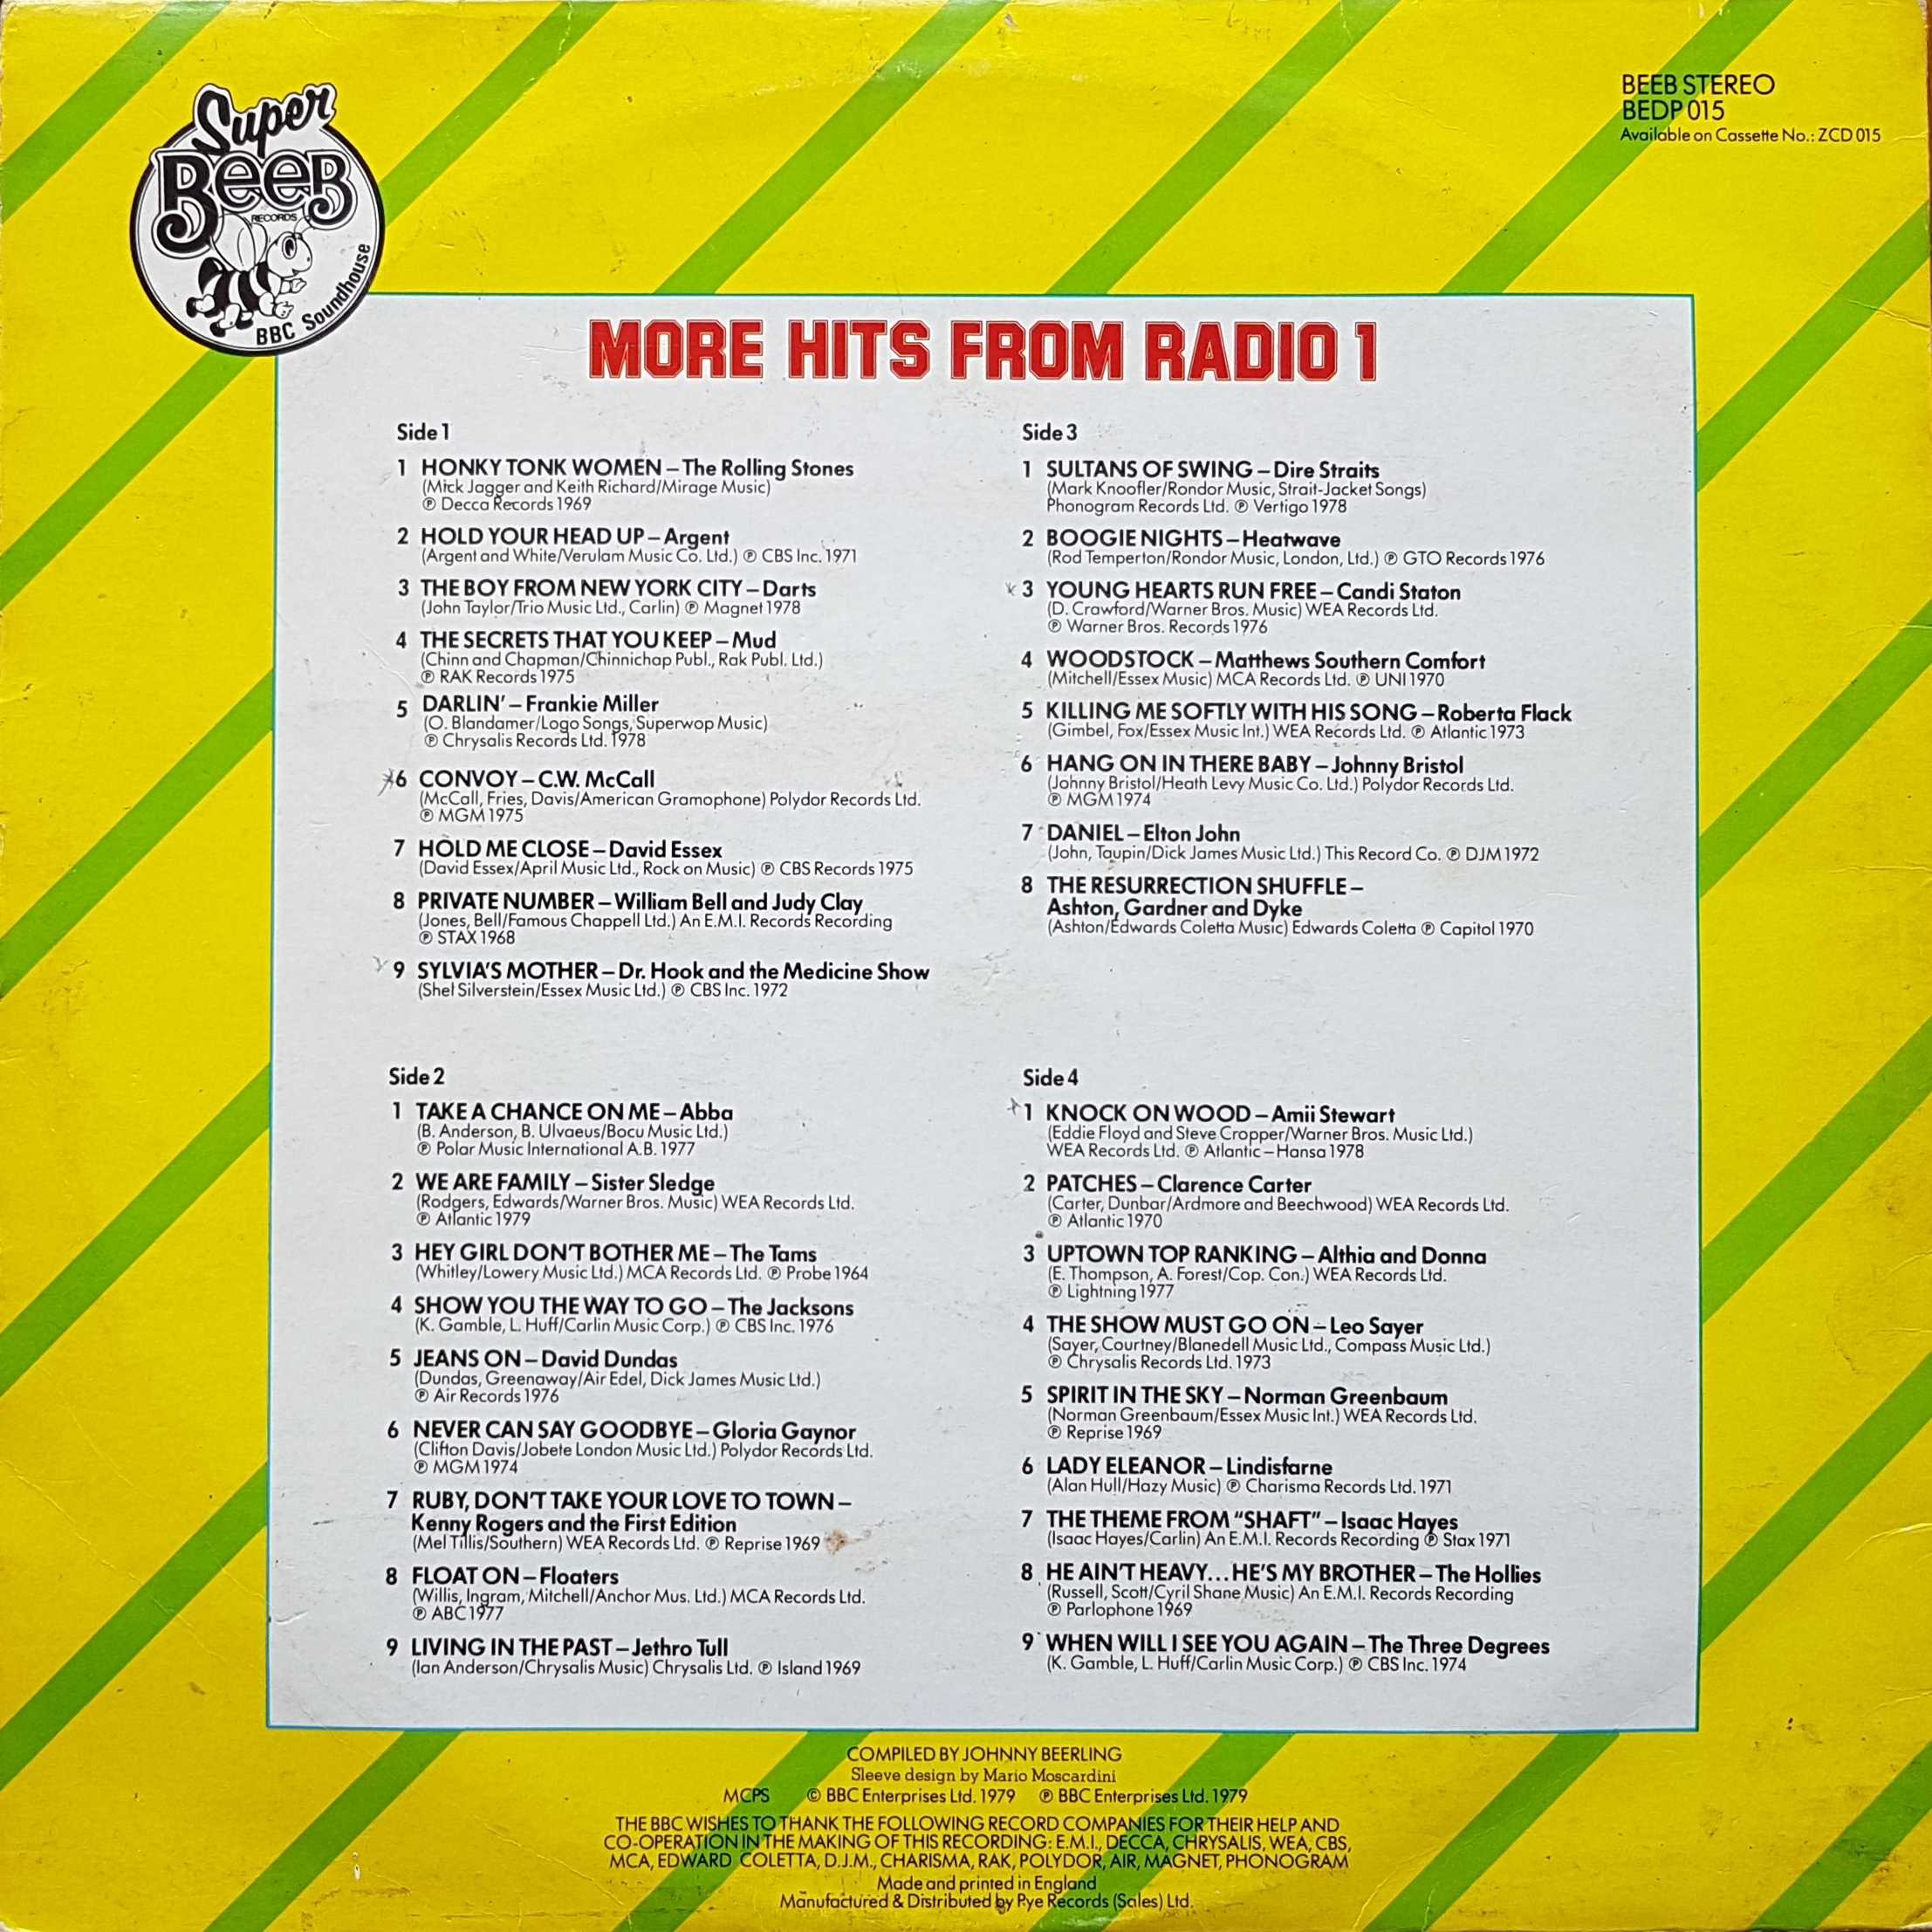 Picture of BEDP 015 More hits from Radio 1 by artist Various from the BBC records and Tapes library